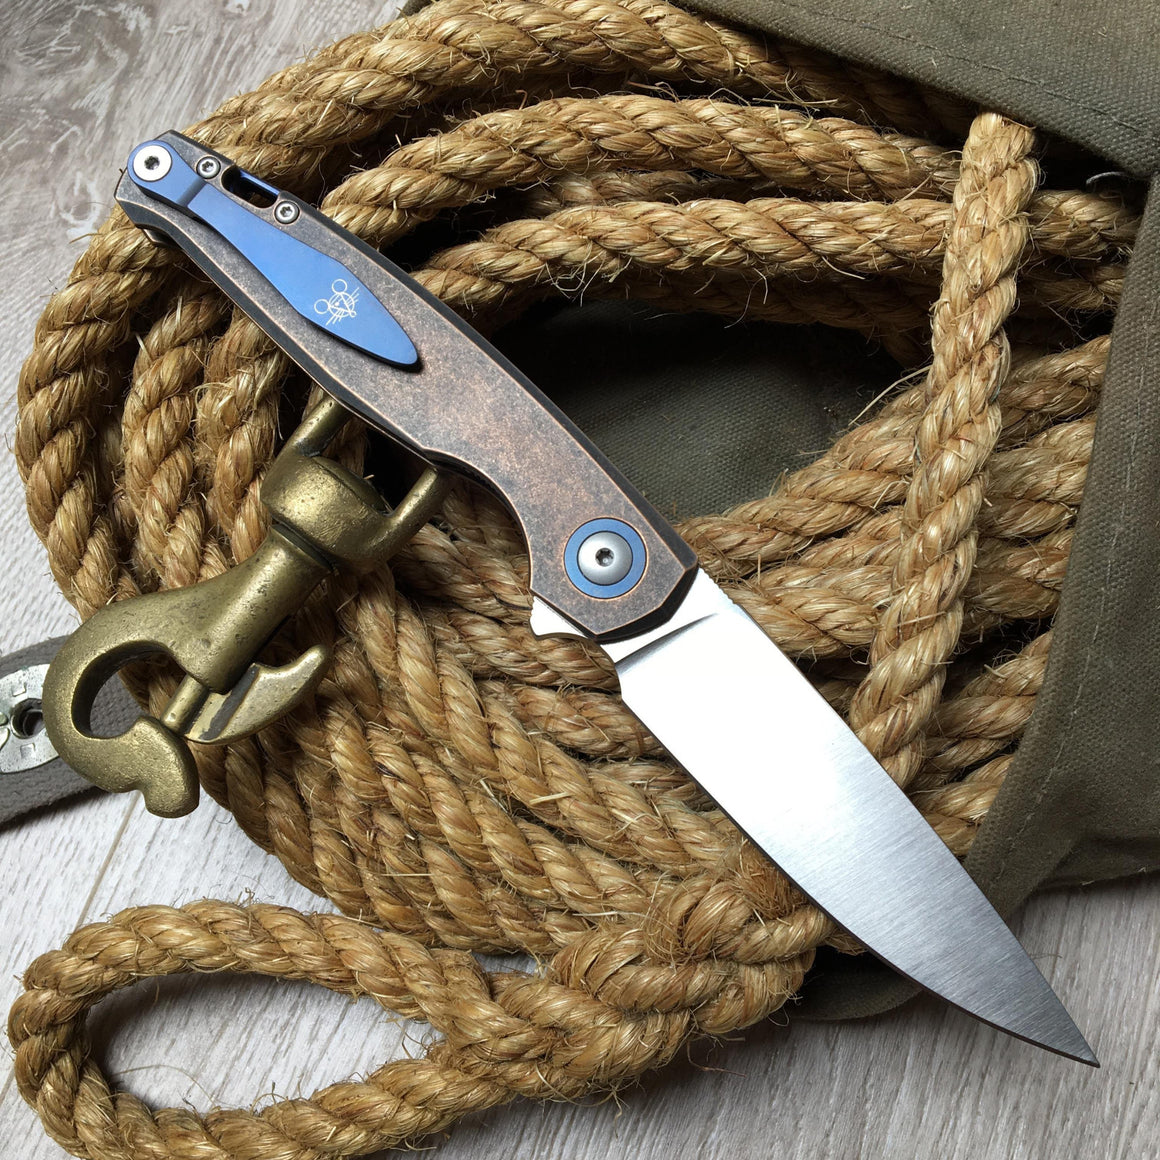 GiantMouse GMP3 - GiantMouse Knives - Anso Vox Collaborations